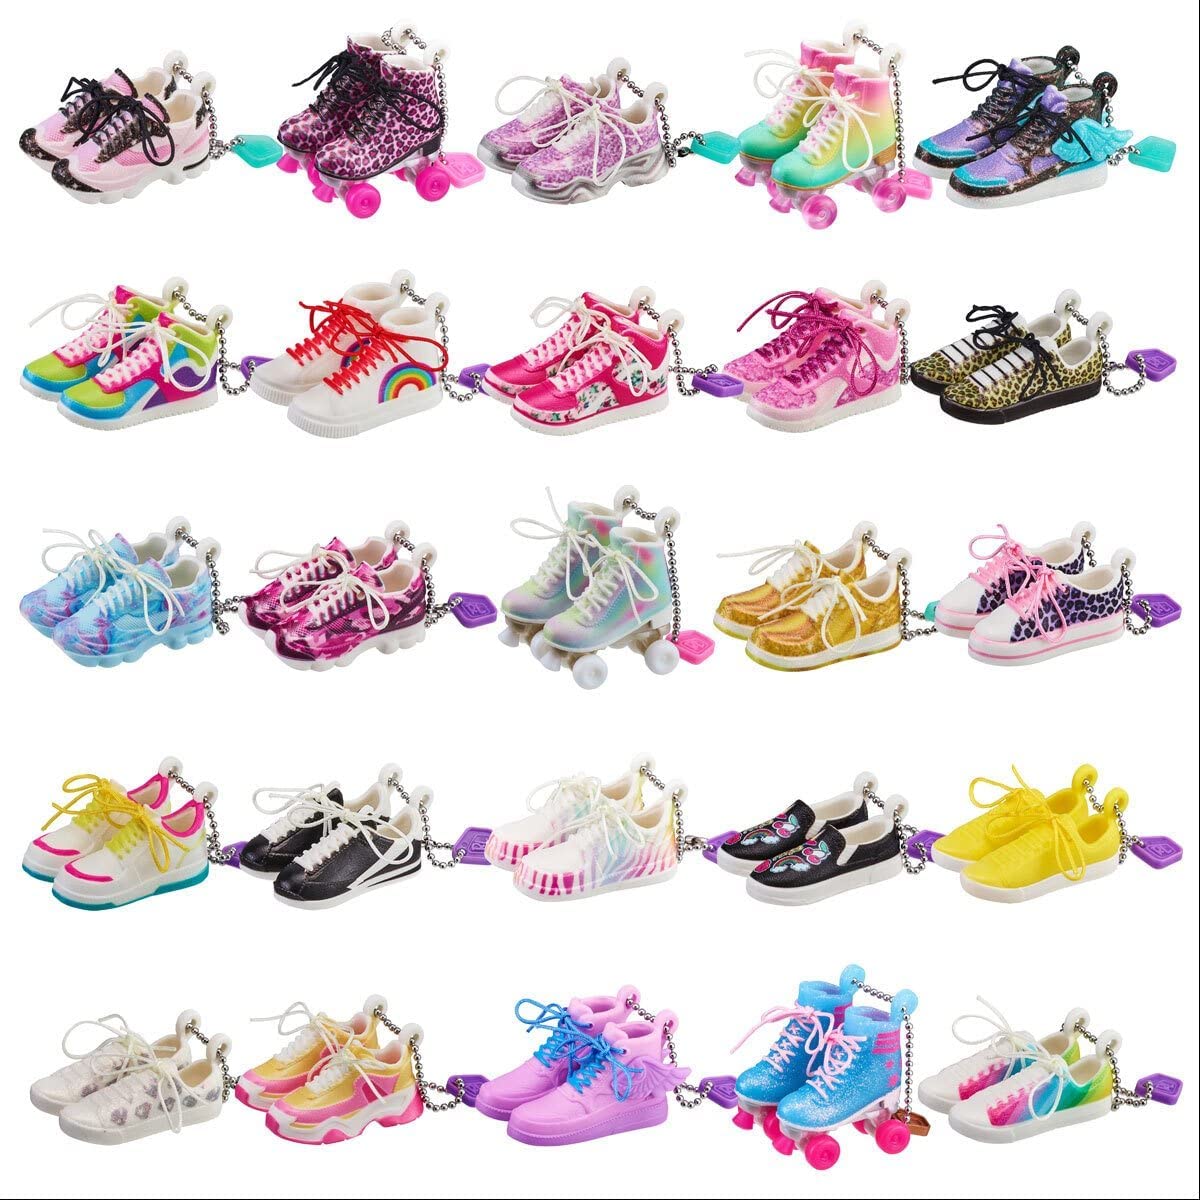 Real Littles - Collectible Micro Shoes with 25 Styles to Collect!